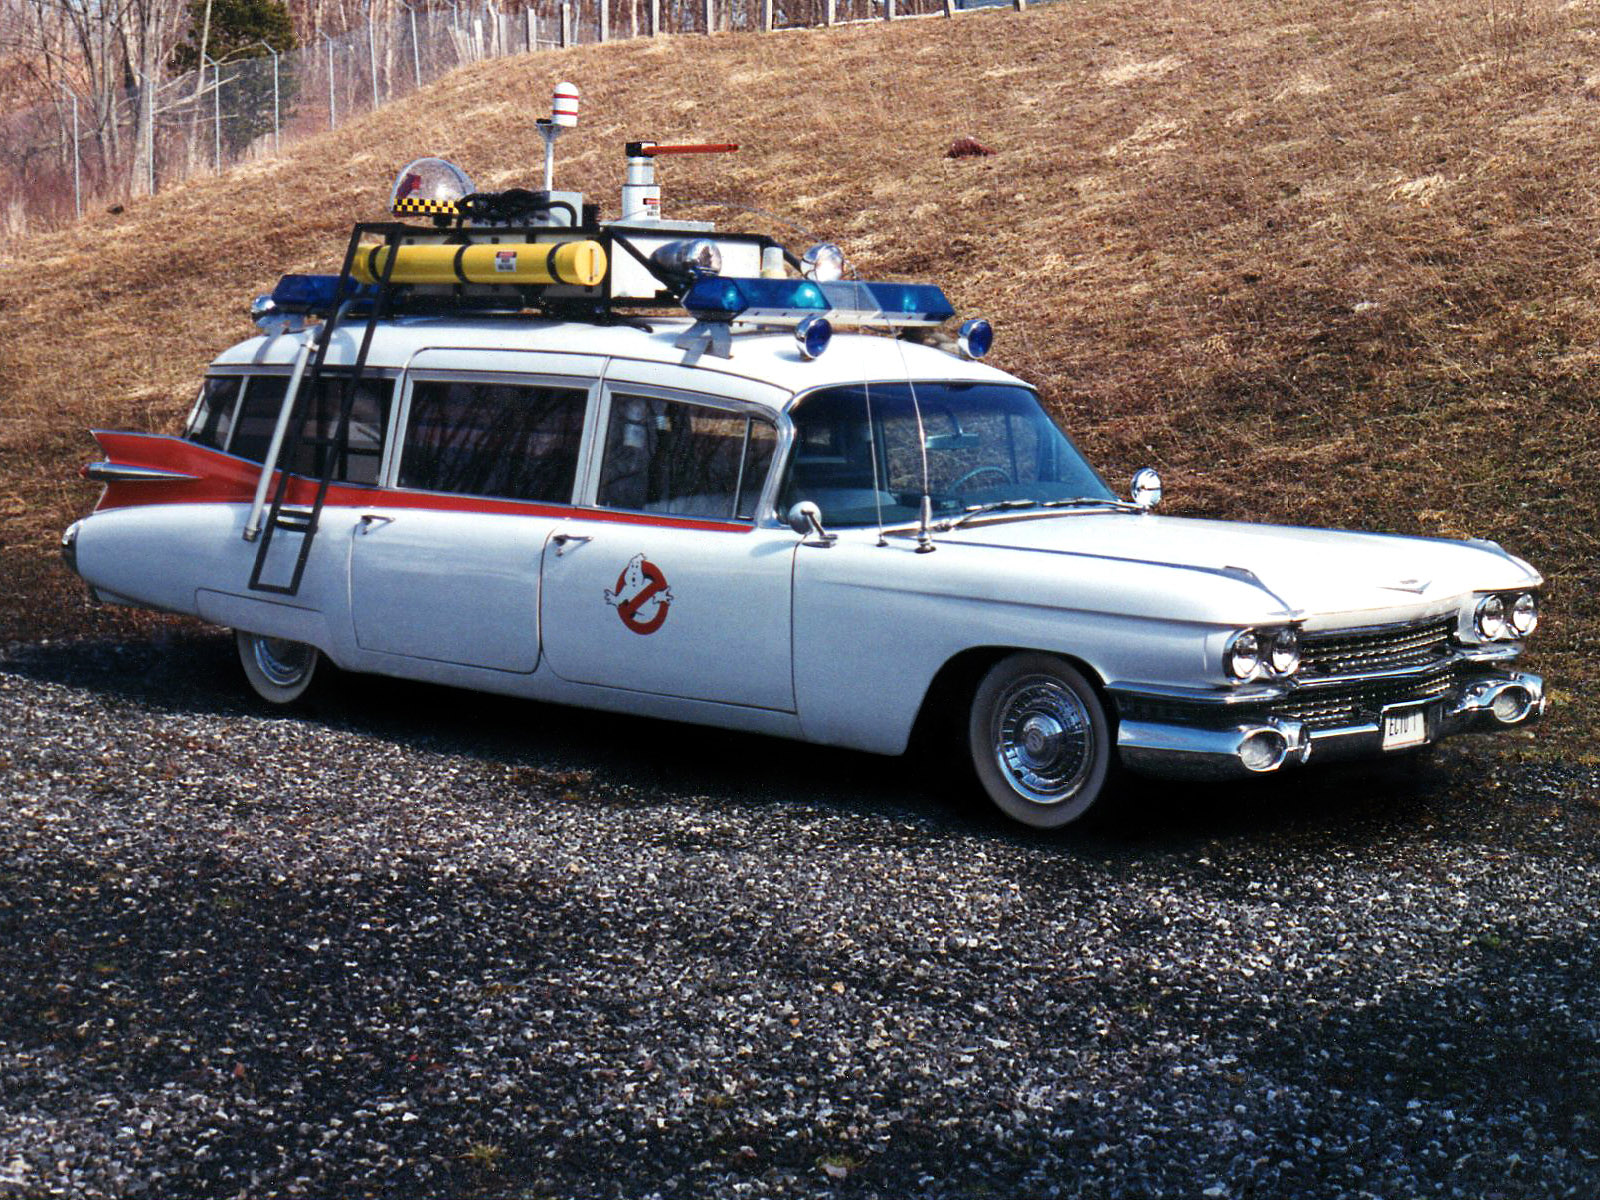 1984, Cadillac, Miller, Meteor, Ectomobile, Ghostbusters, Movies, Ambulance, Emergency, Custom Wallpaper